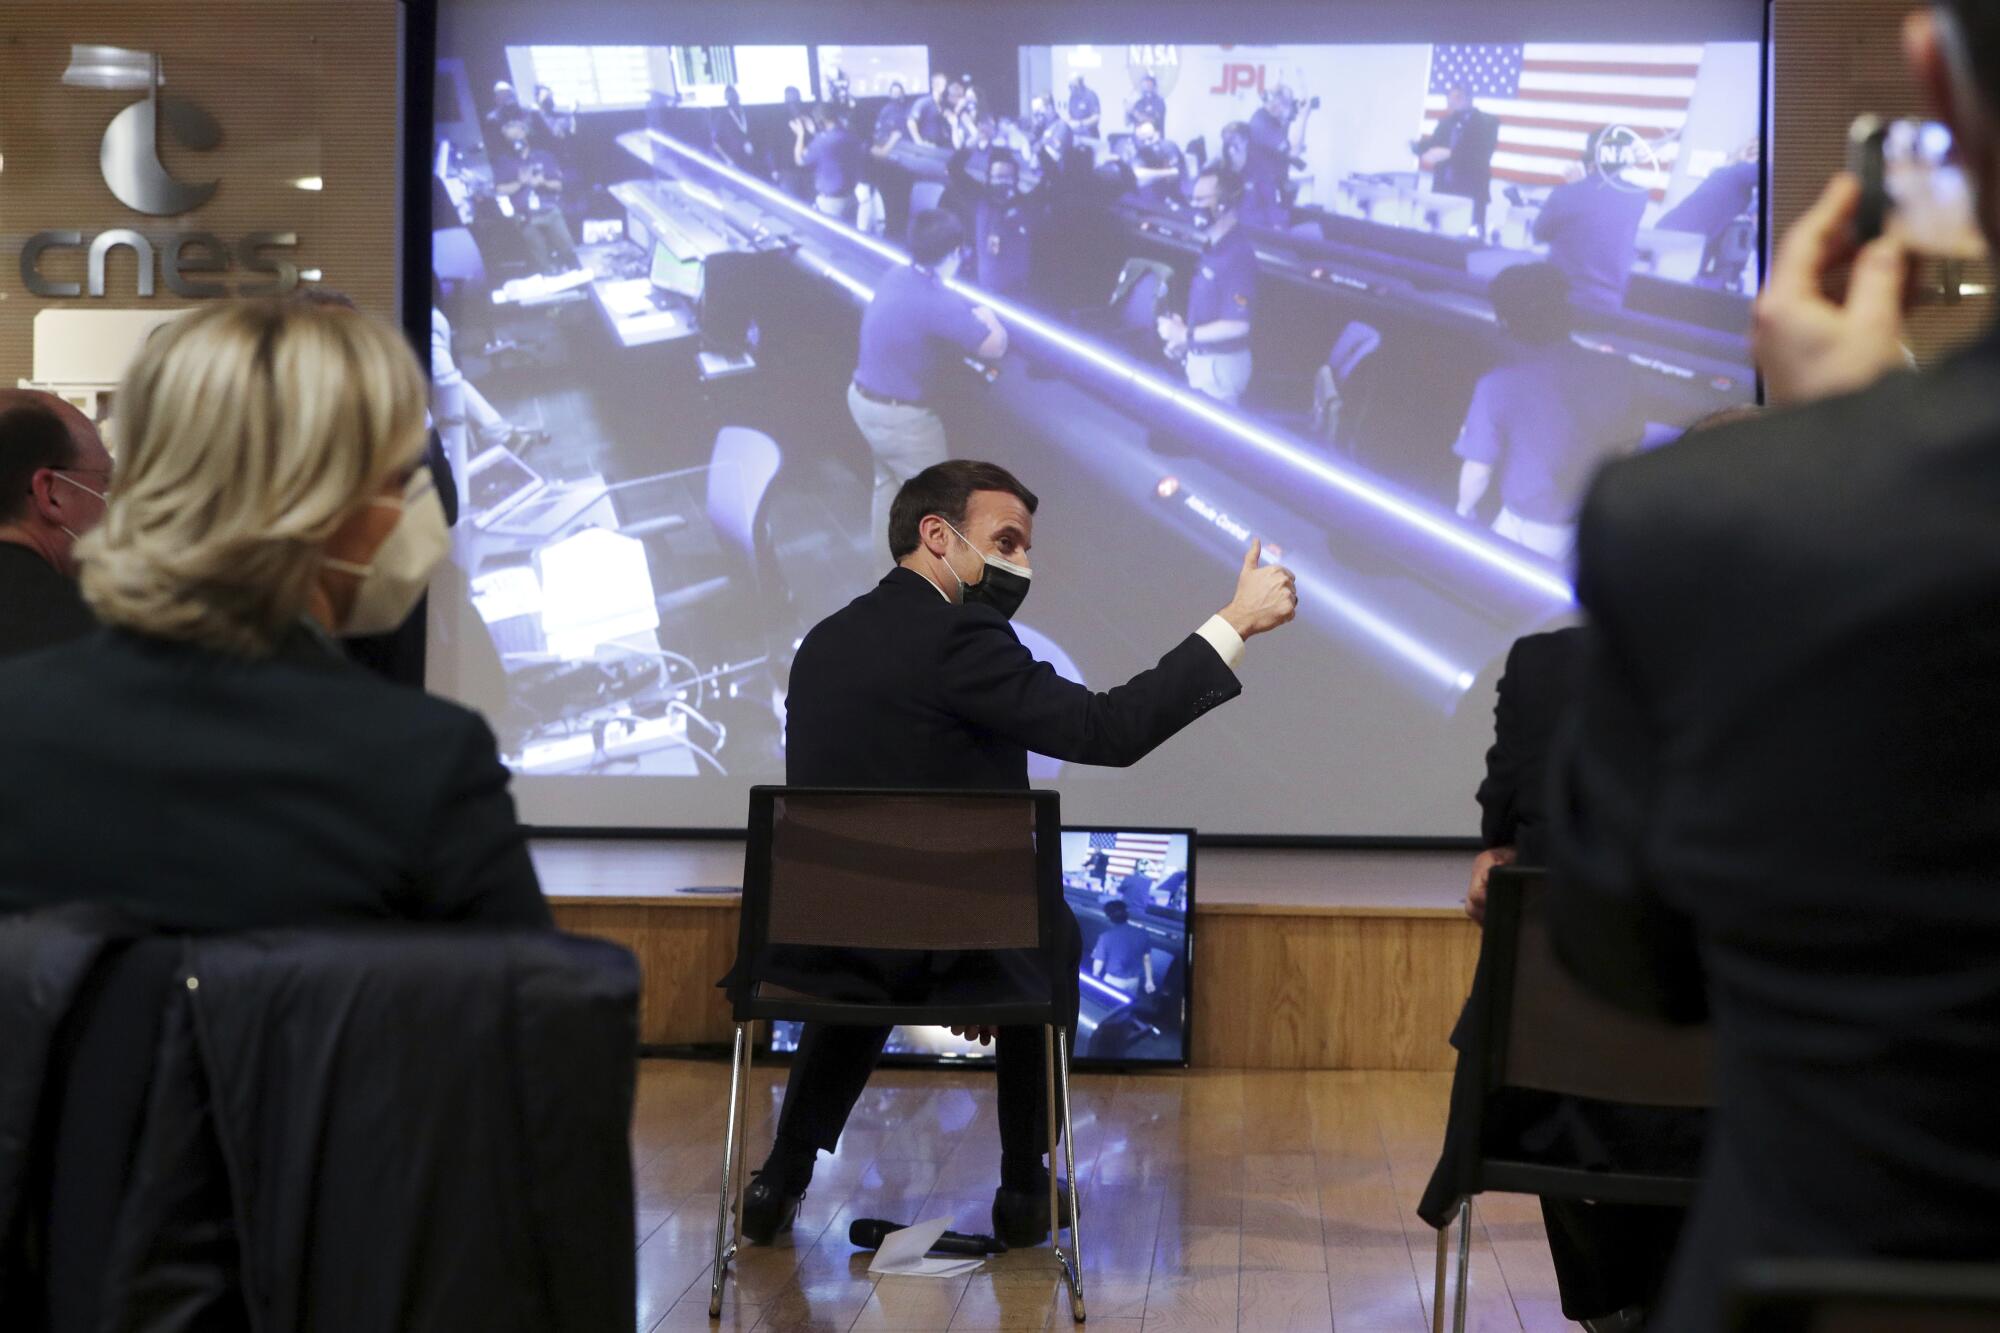 French President Emmanuel Macron and others sit in front of a projector screen